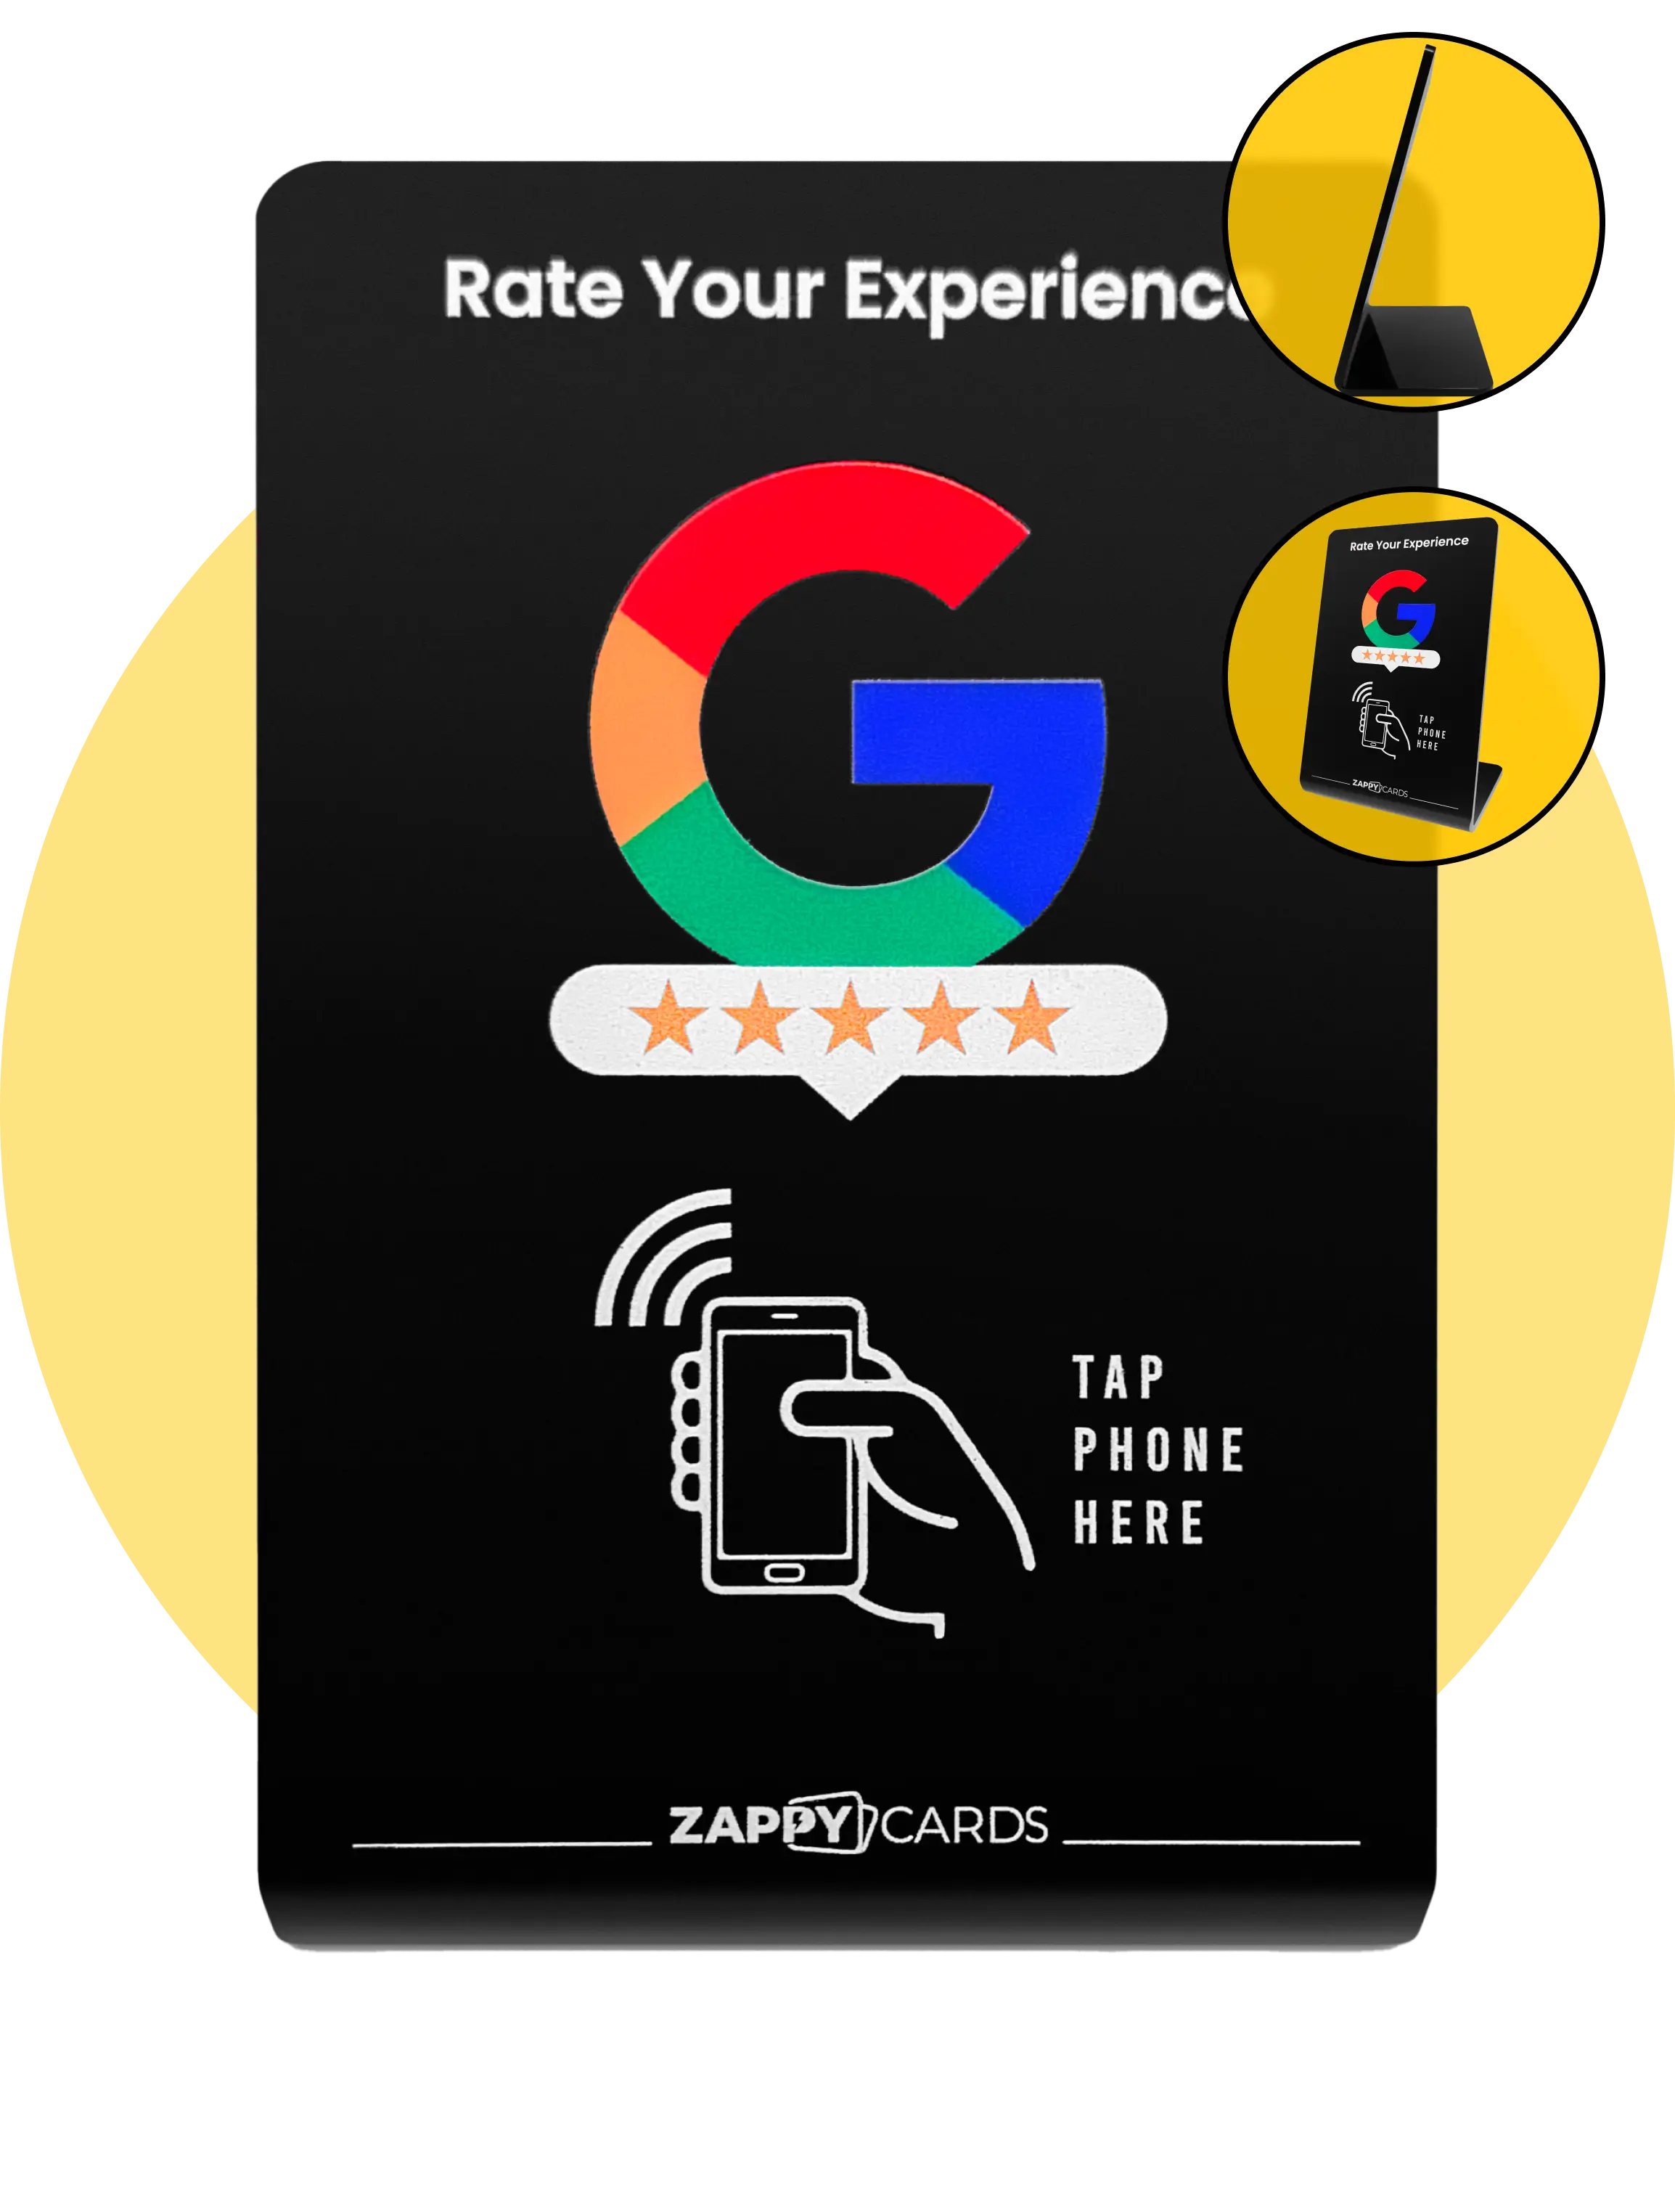 Zappy Cards - THE BEST WAY TO GROW YOUR LOCAL BUSINESS! 